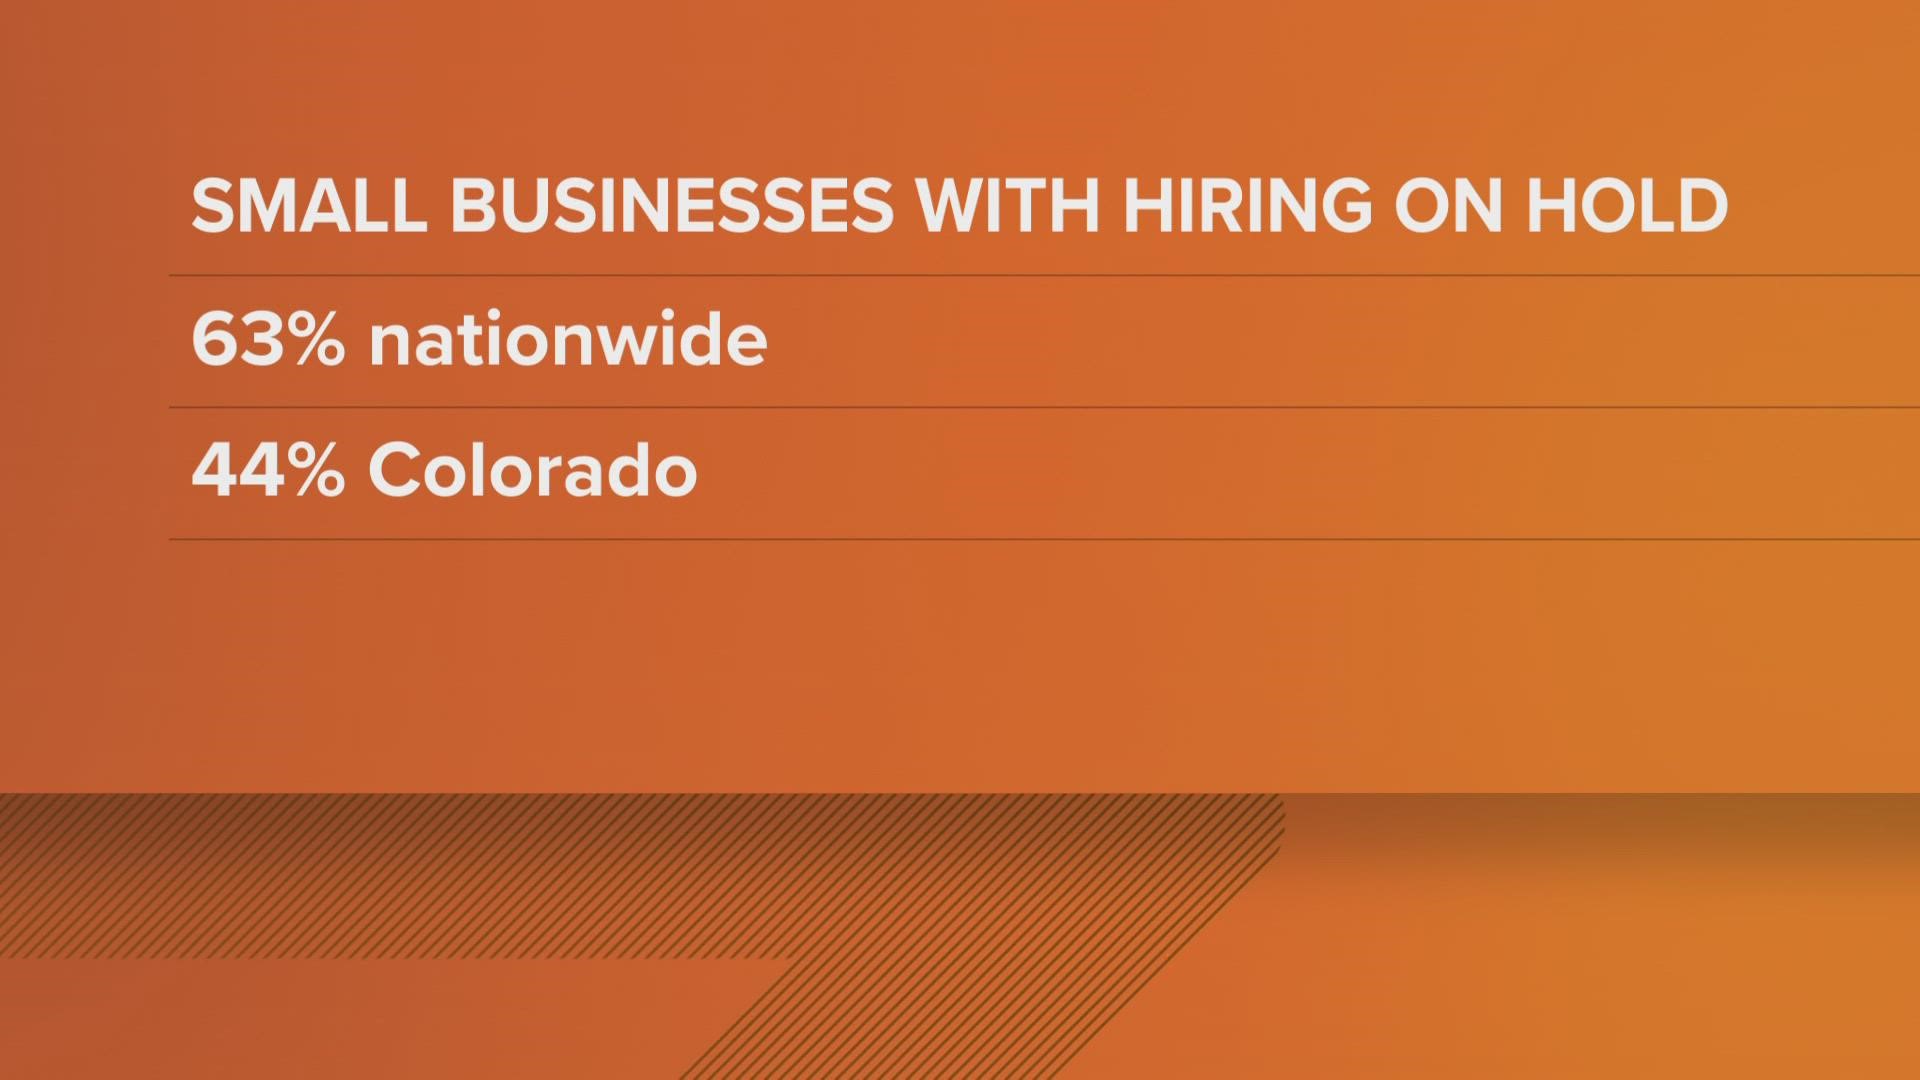 Employment expert Whitney Traylor discusses how small businesses are holding up in the current market, and highlights some resources for Colorado business owners.